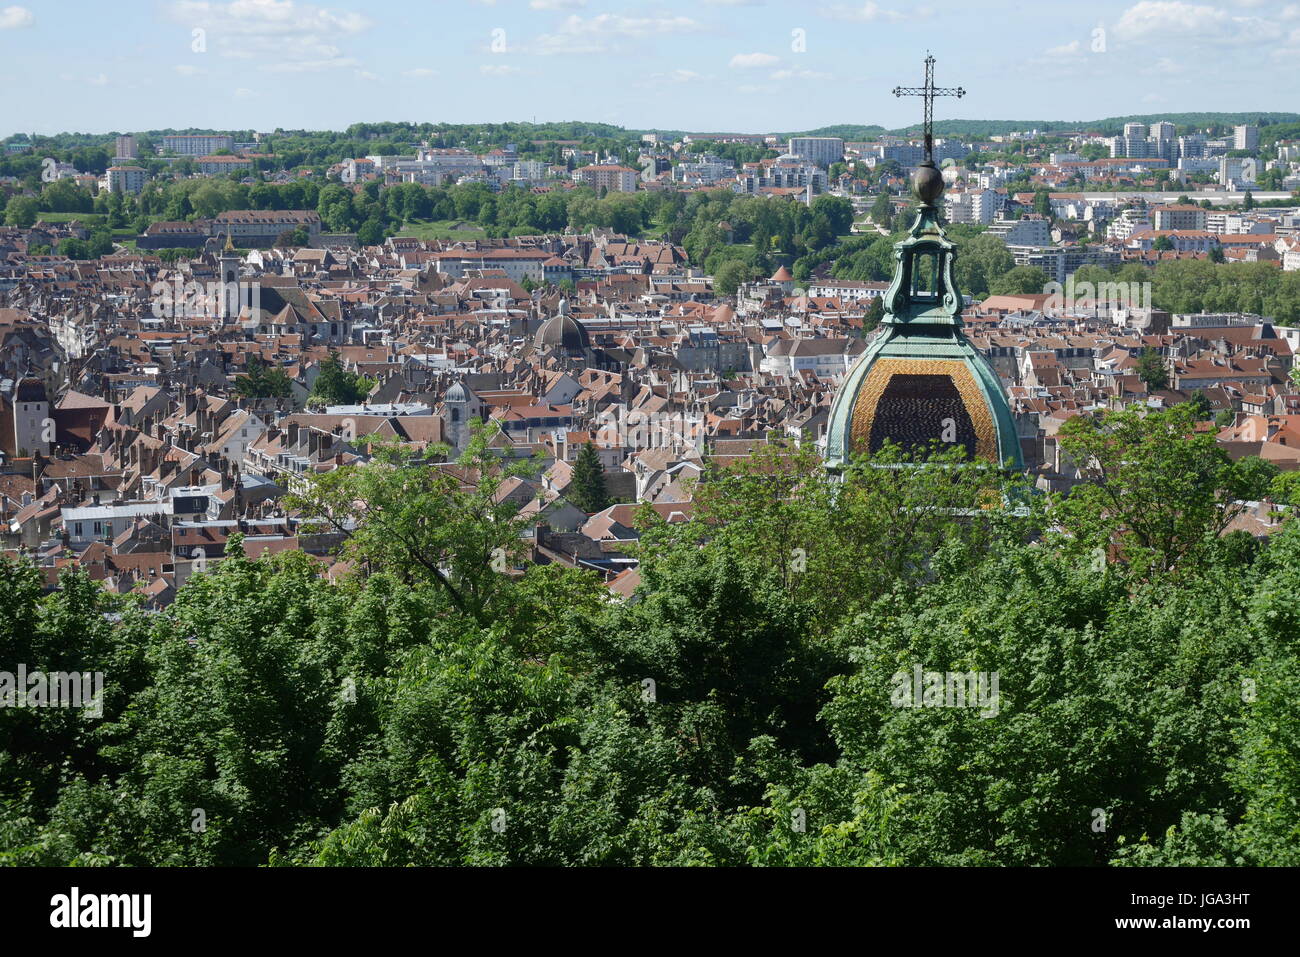 Aerial view of Besancon, France Stock Photo